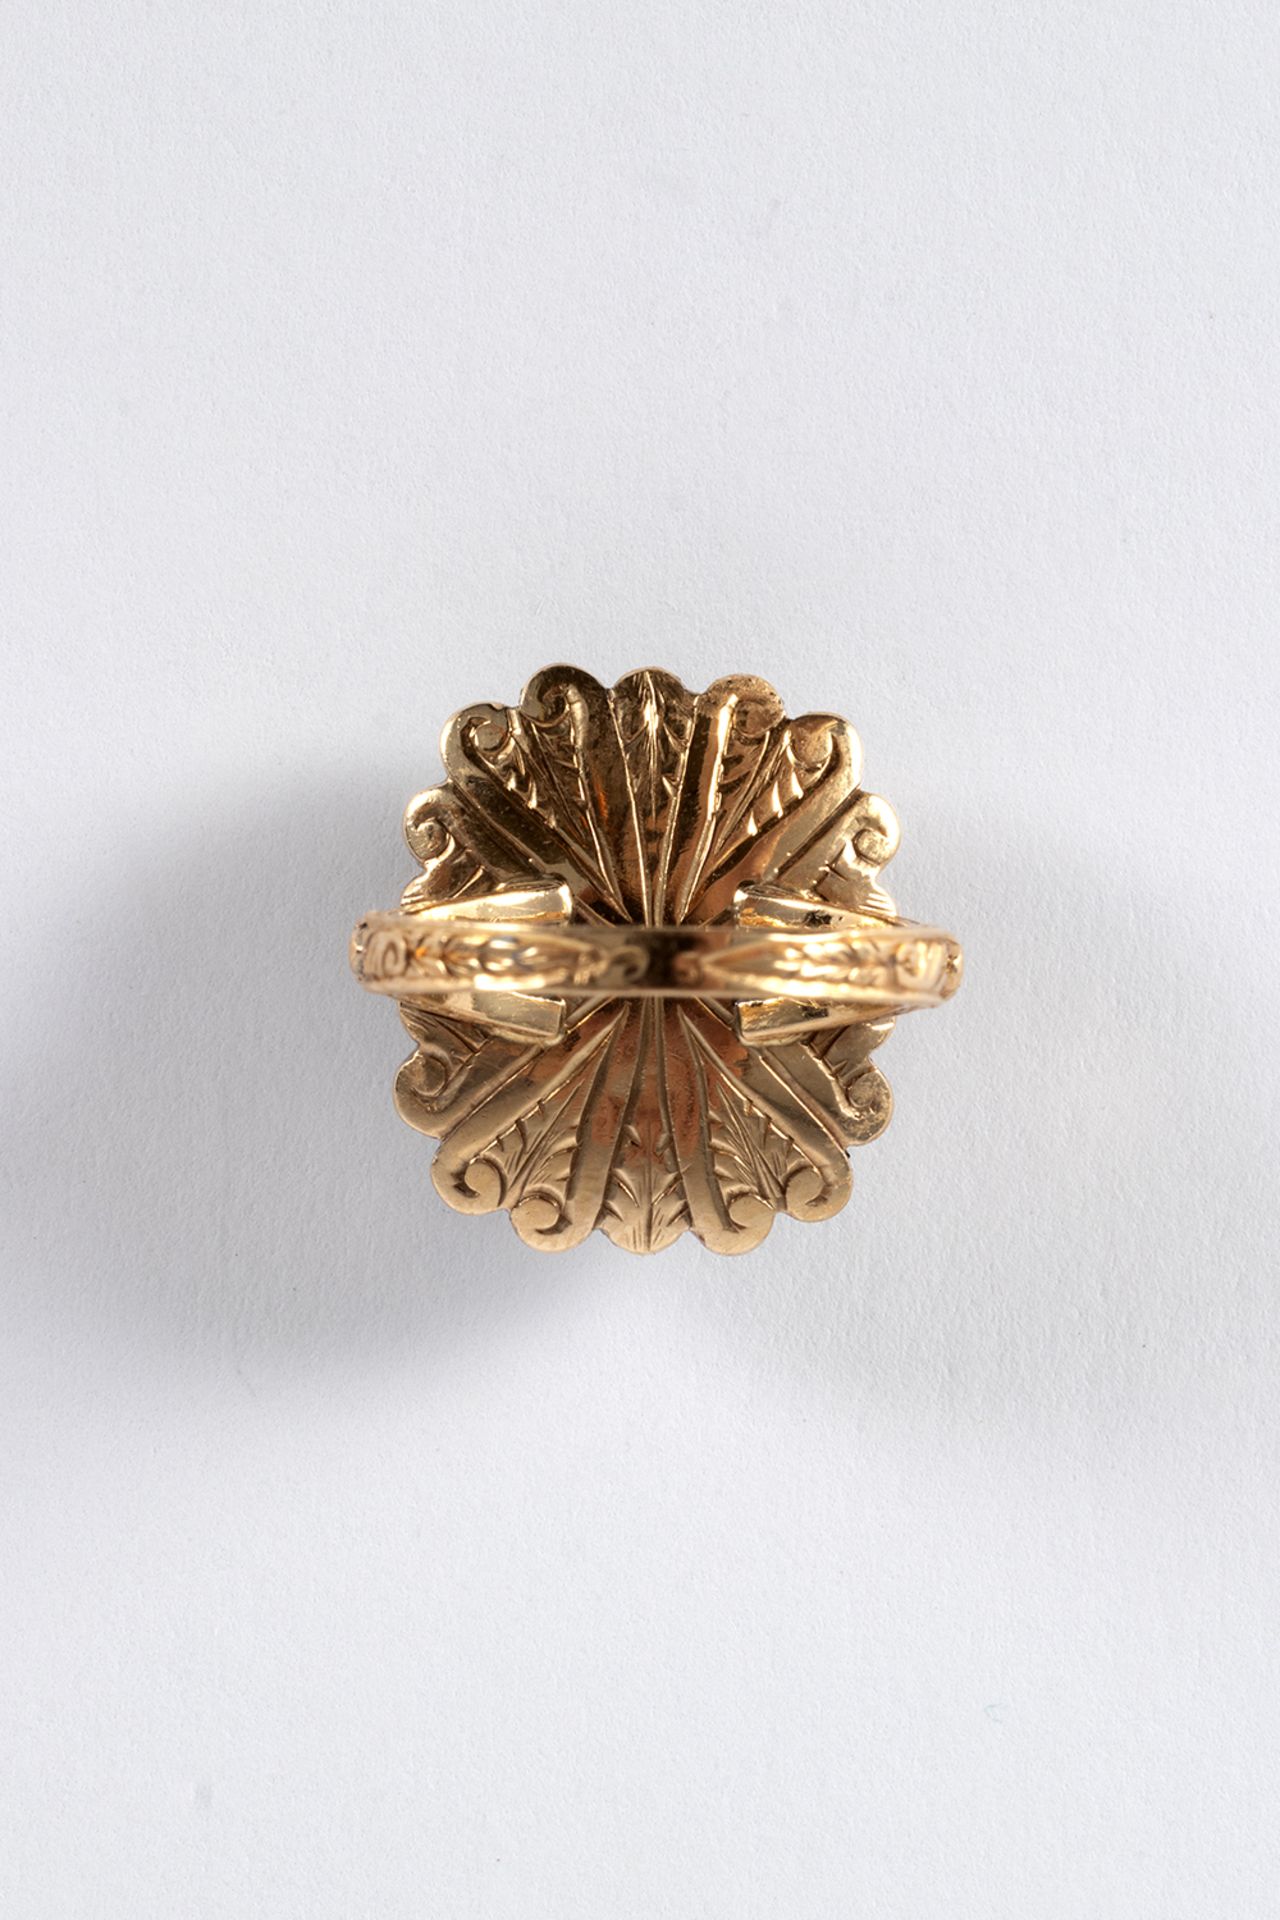 Rosette ring, Elizabethan style in gold and views in silver with emeralds, oval cut and Diamonds, ro - Image 3 of 5